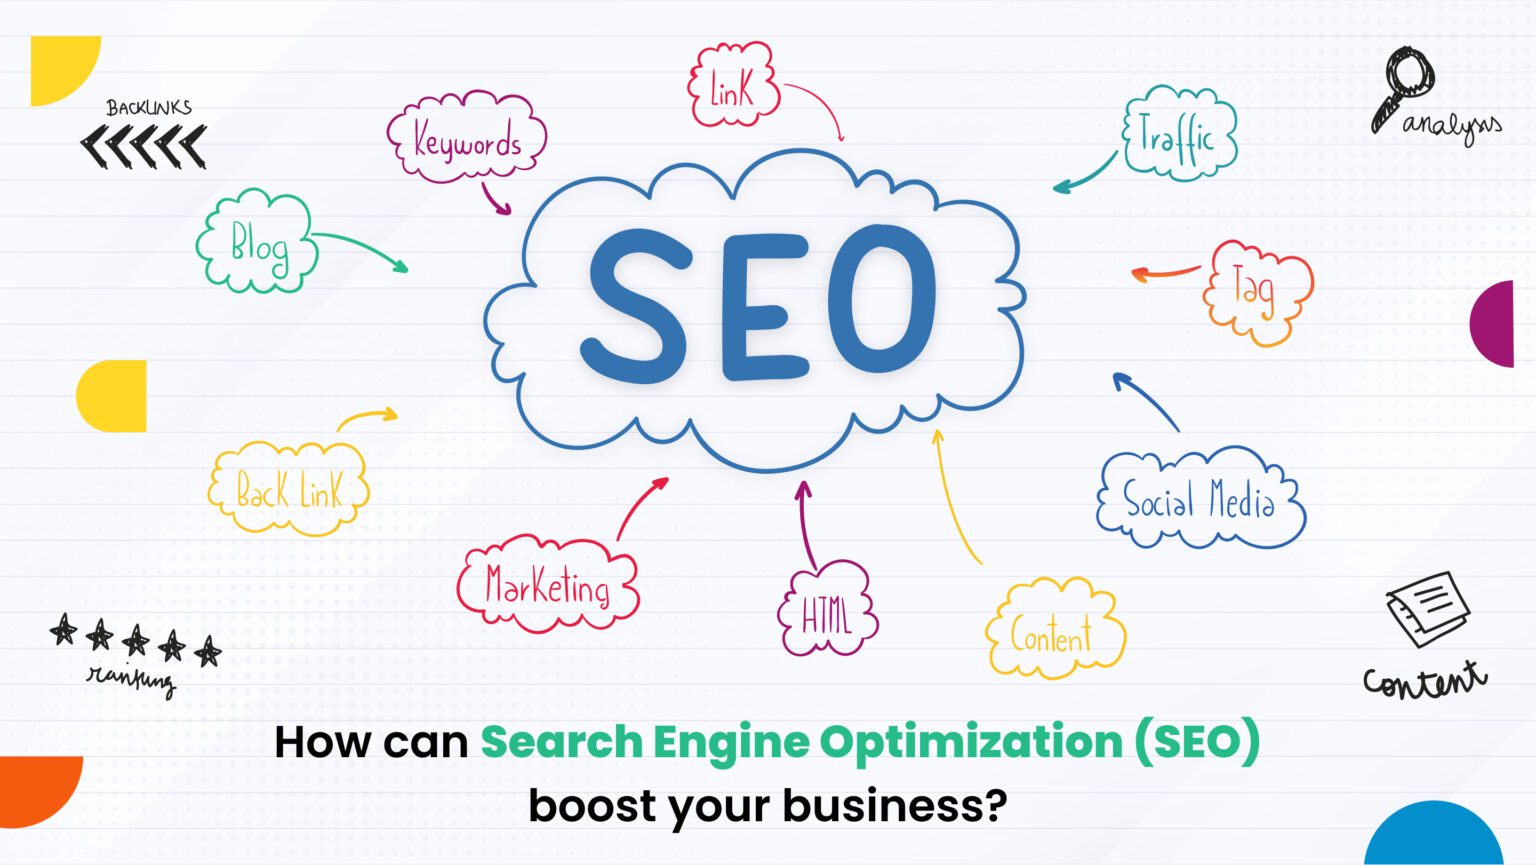 How can Search Engine Optimization (SEO) boost your business?